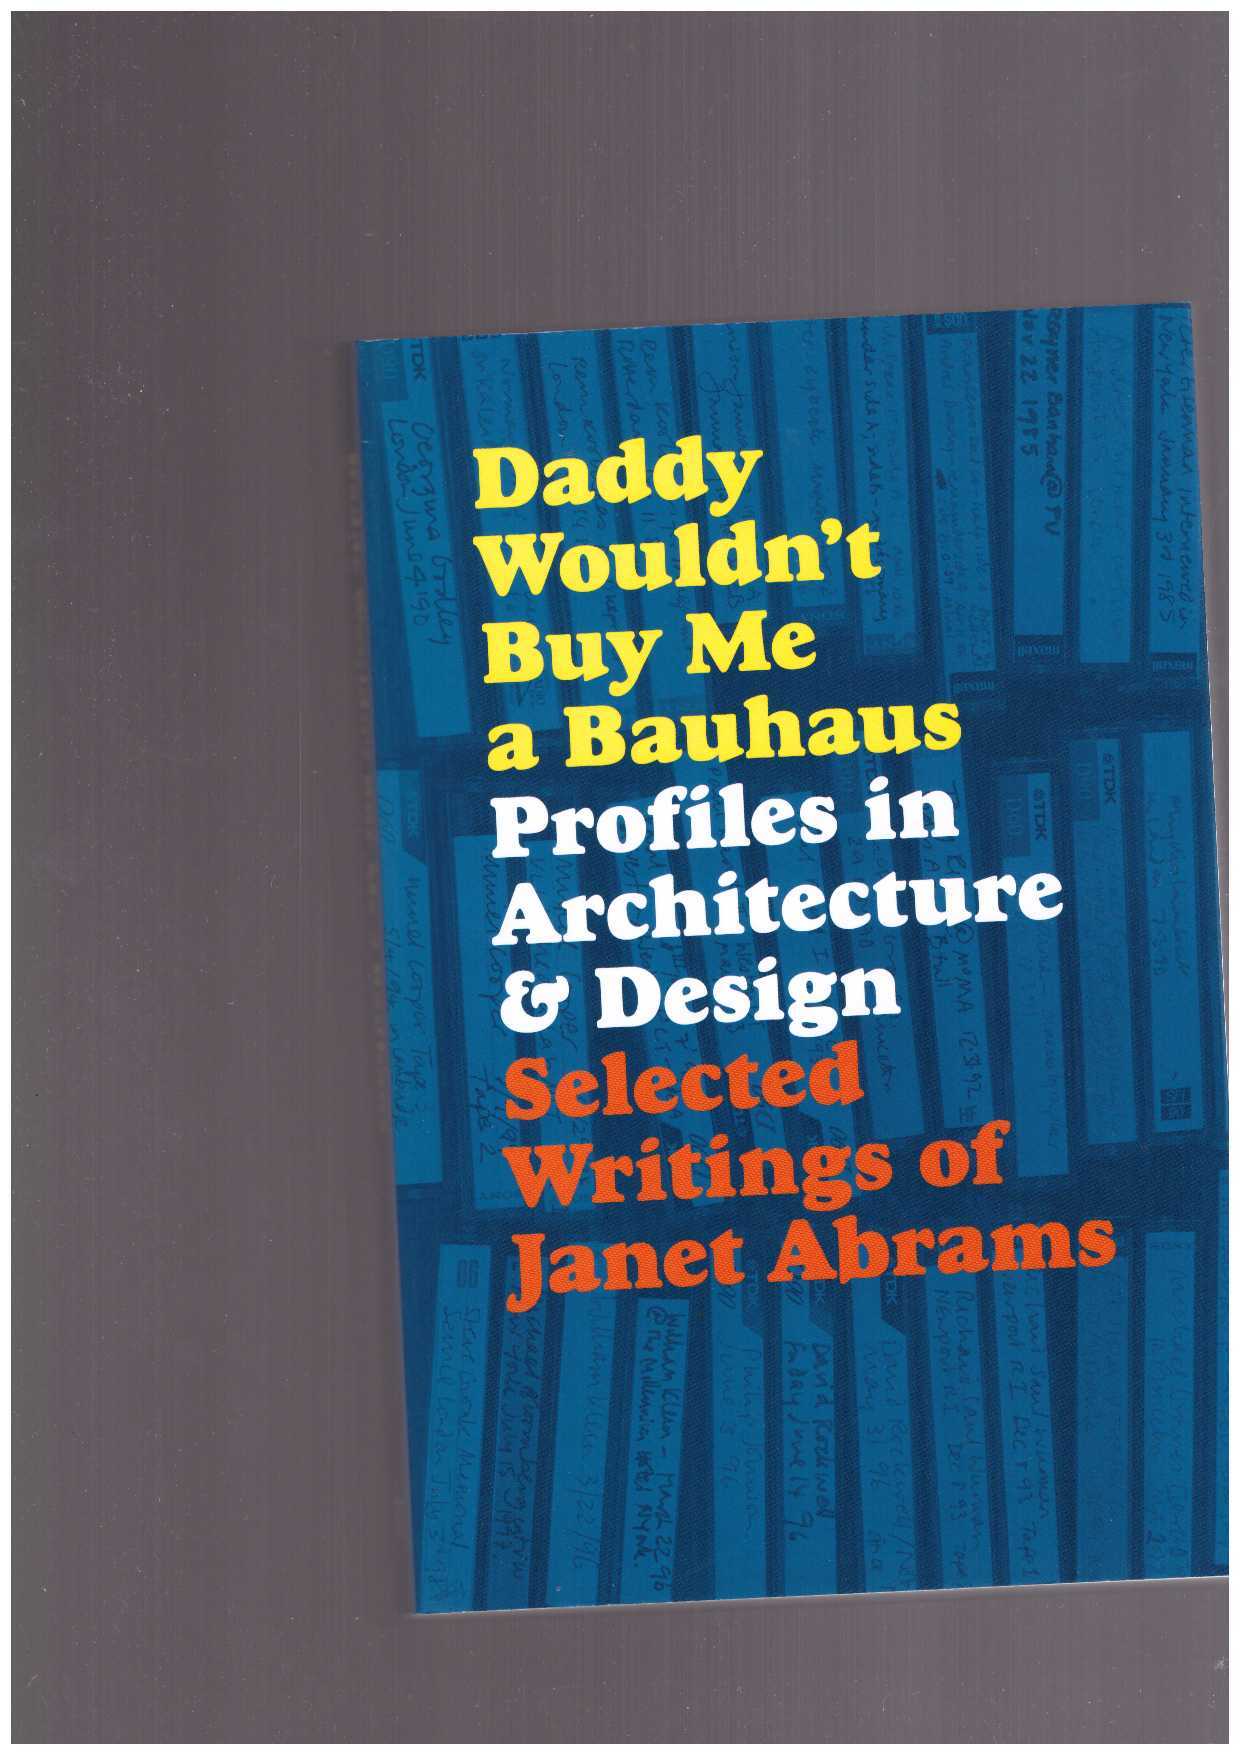  ABRAMS, Janet - Daddy Wouldn't Buy Me a Bauhaus. Profiles in Architecture and Design